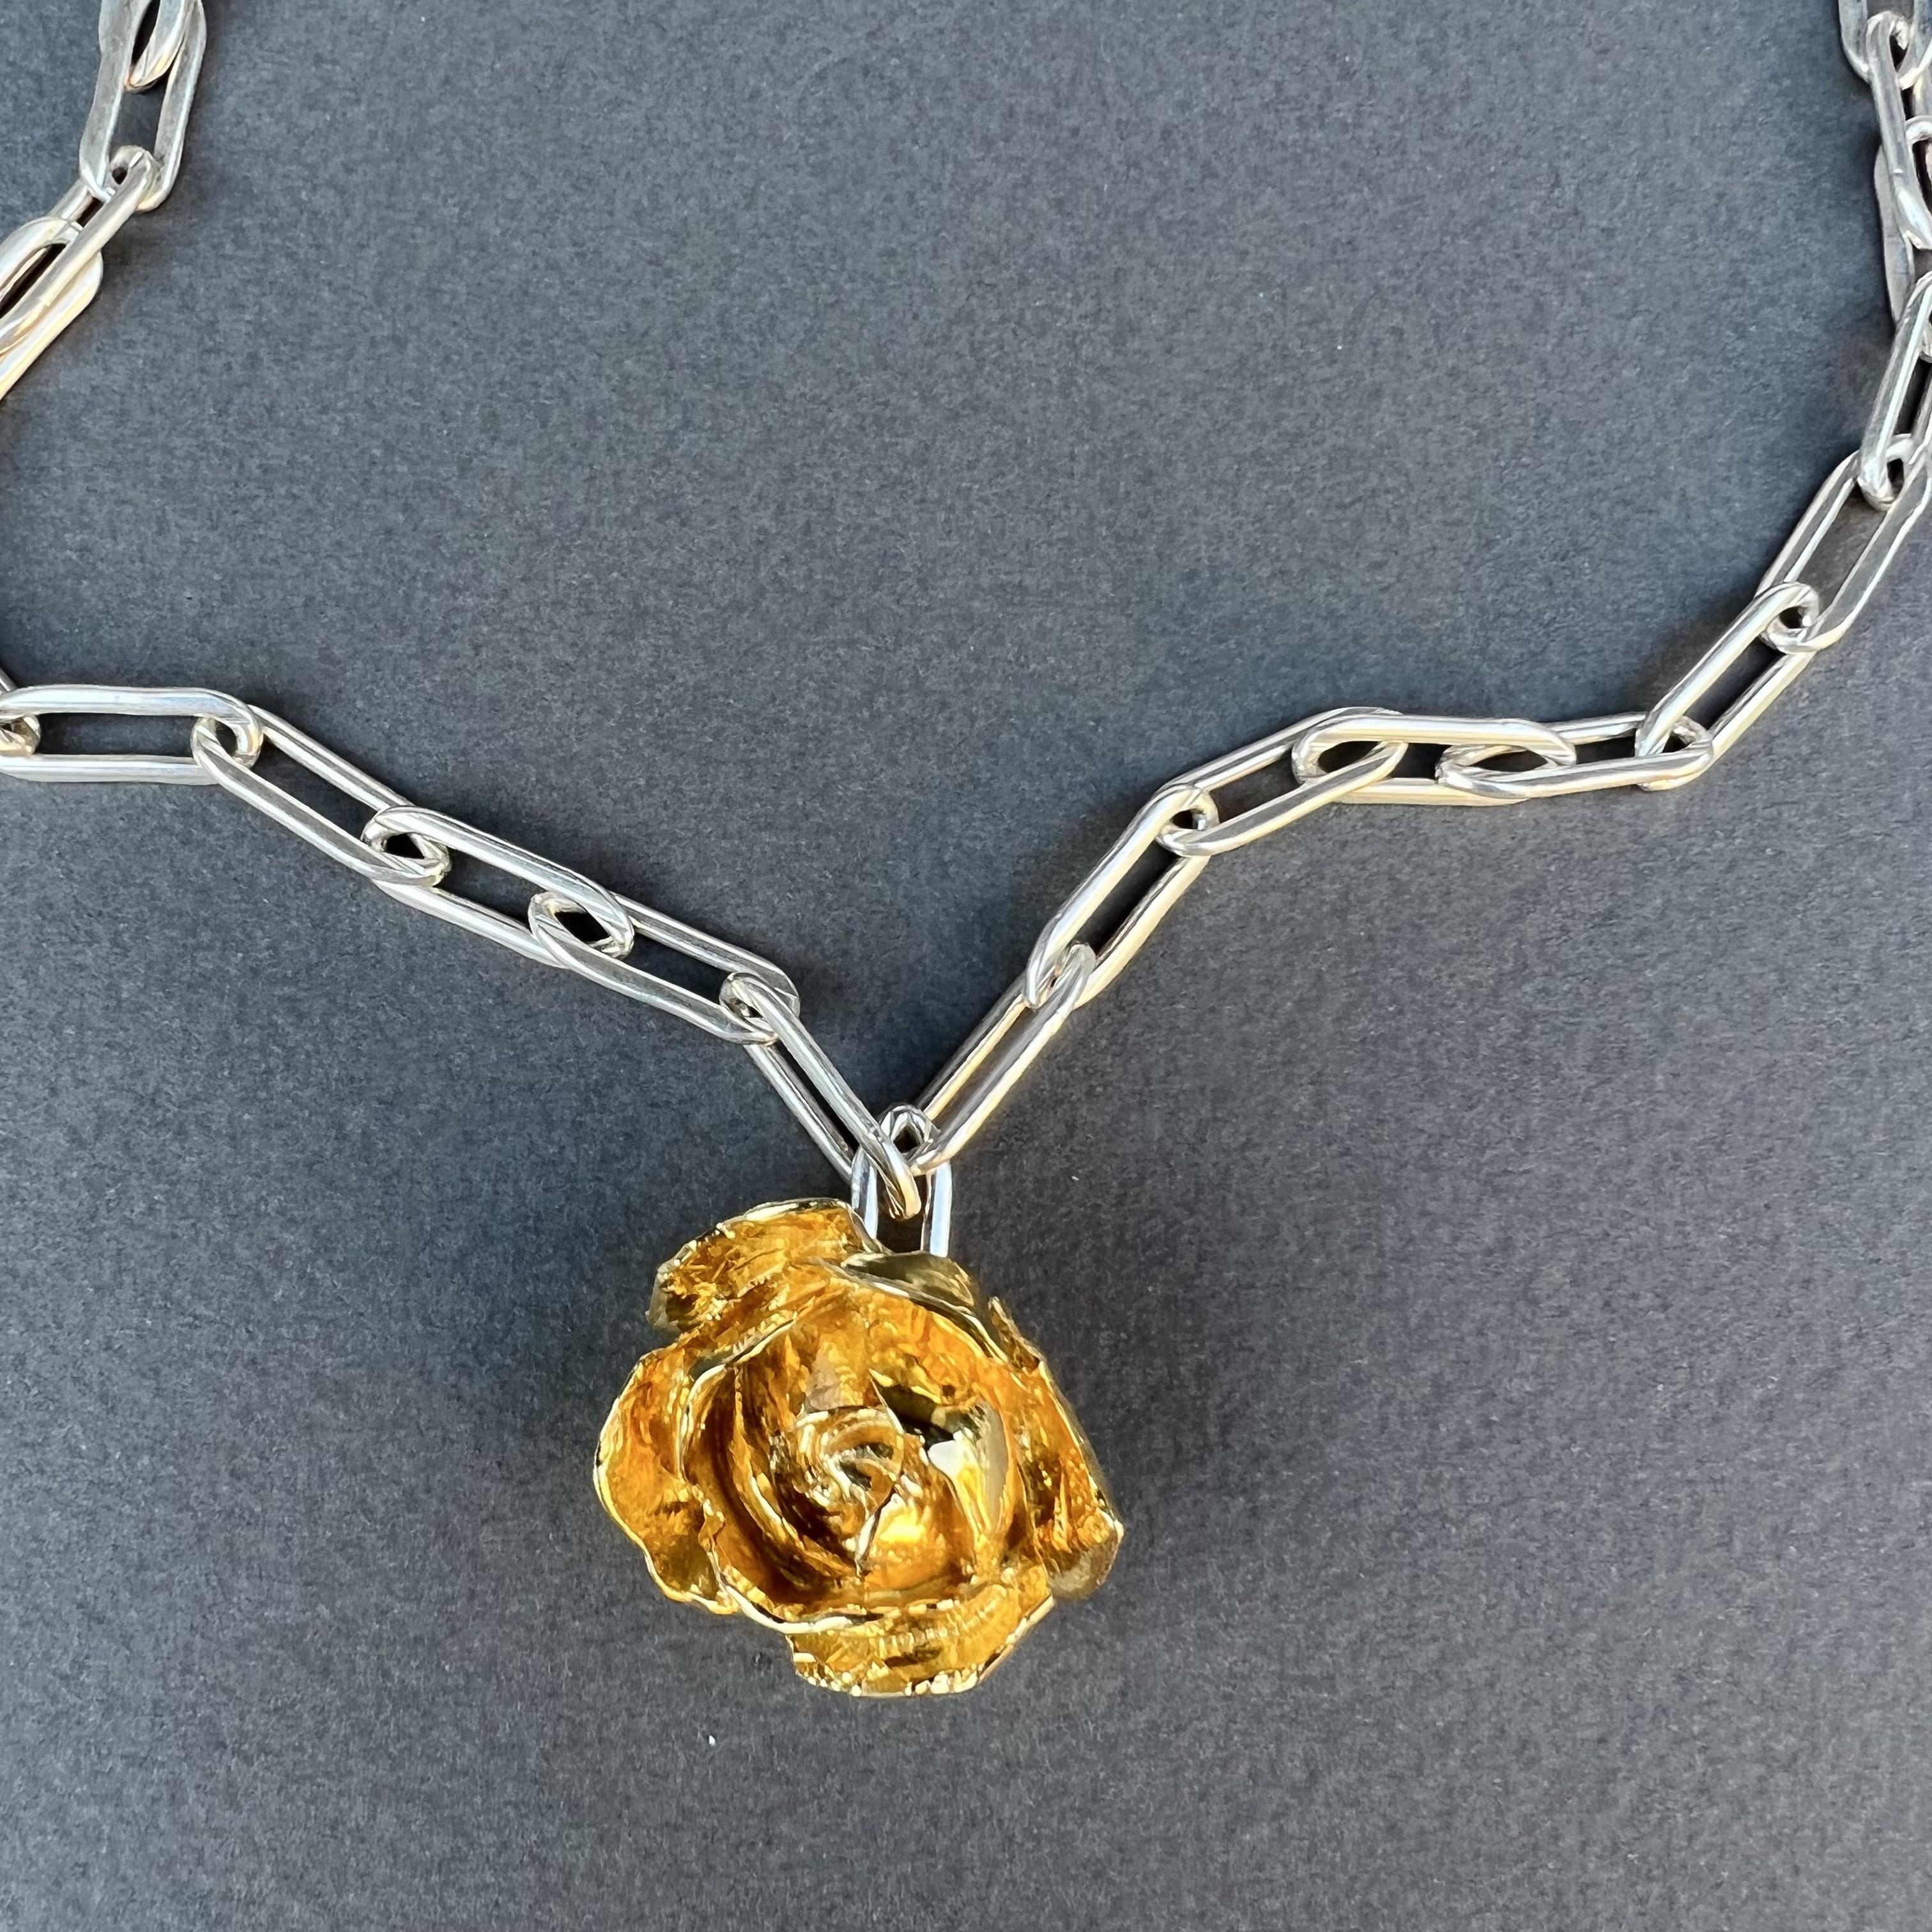 Rose Flower Necklace Love Sterling Silver Chain J Dauphin In New Condition For Sale In Los Angeles, CA